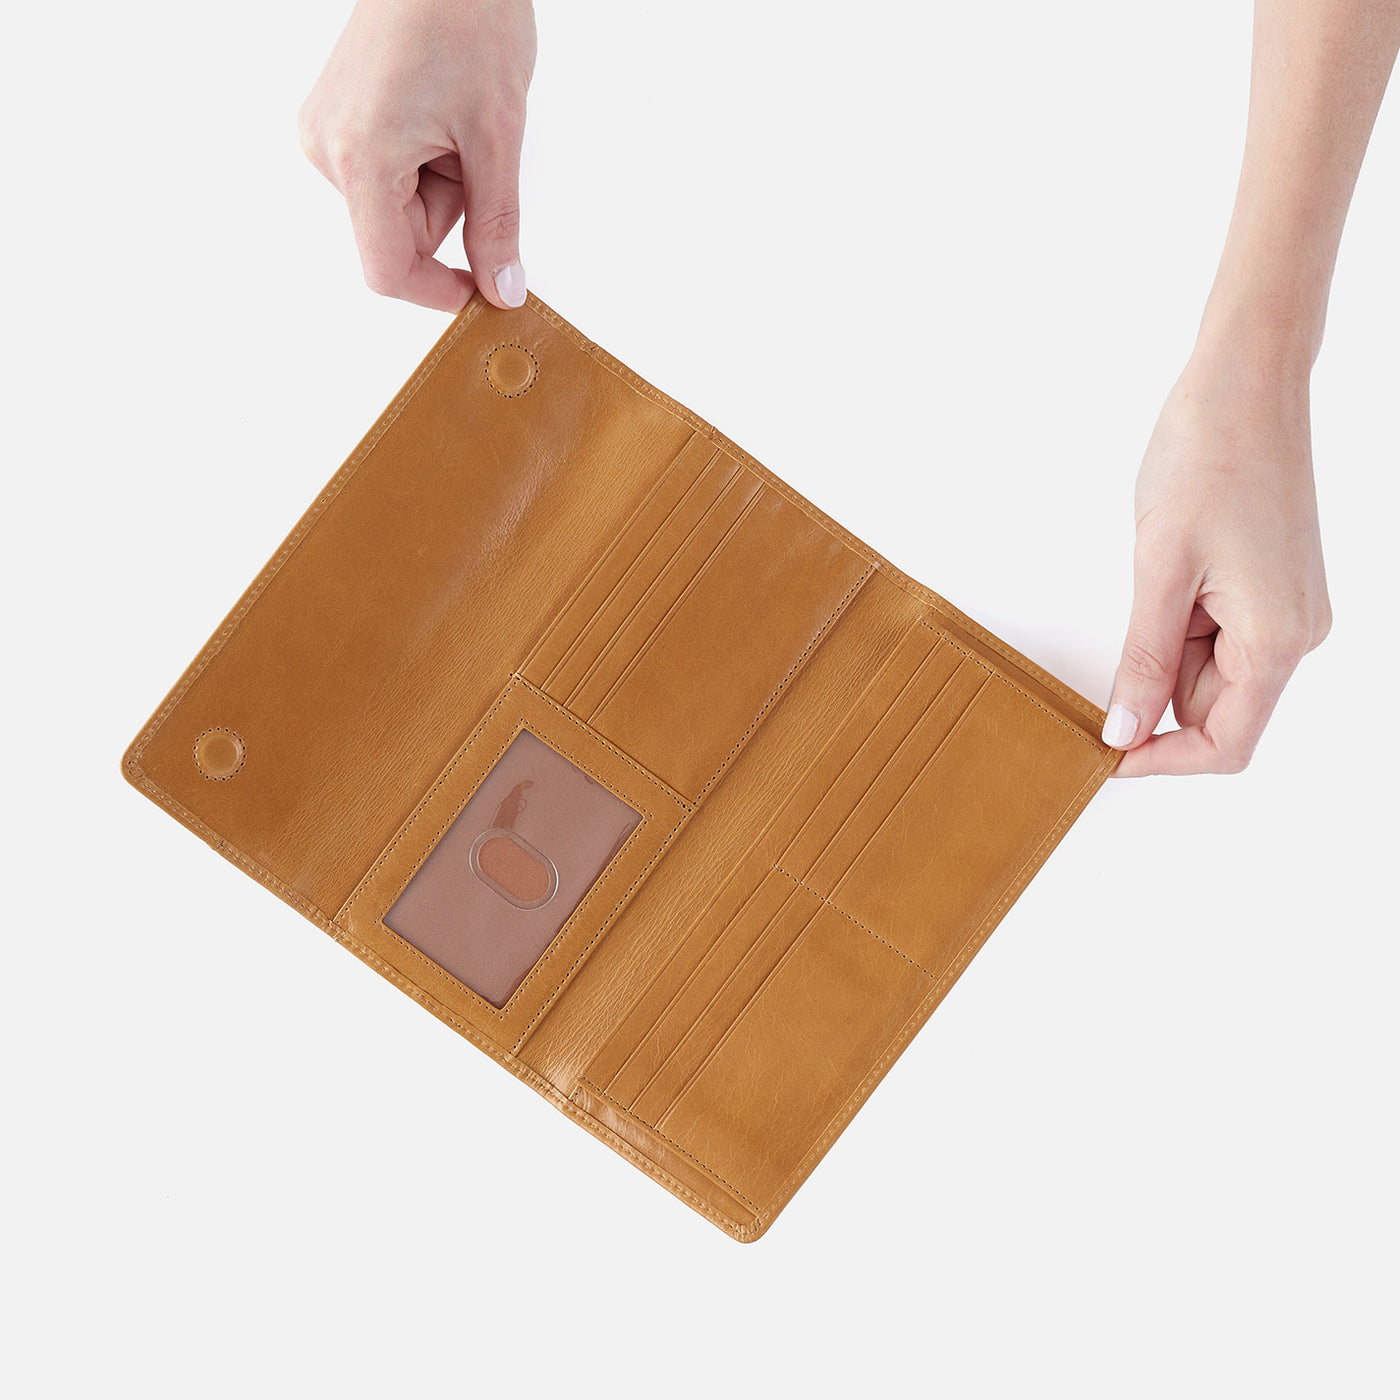 Jill Large Trifold Wallet in Polished Leather - Natural